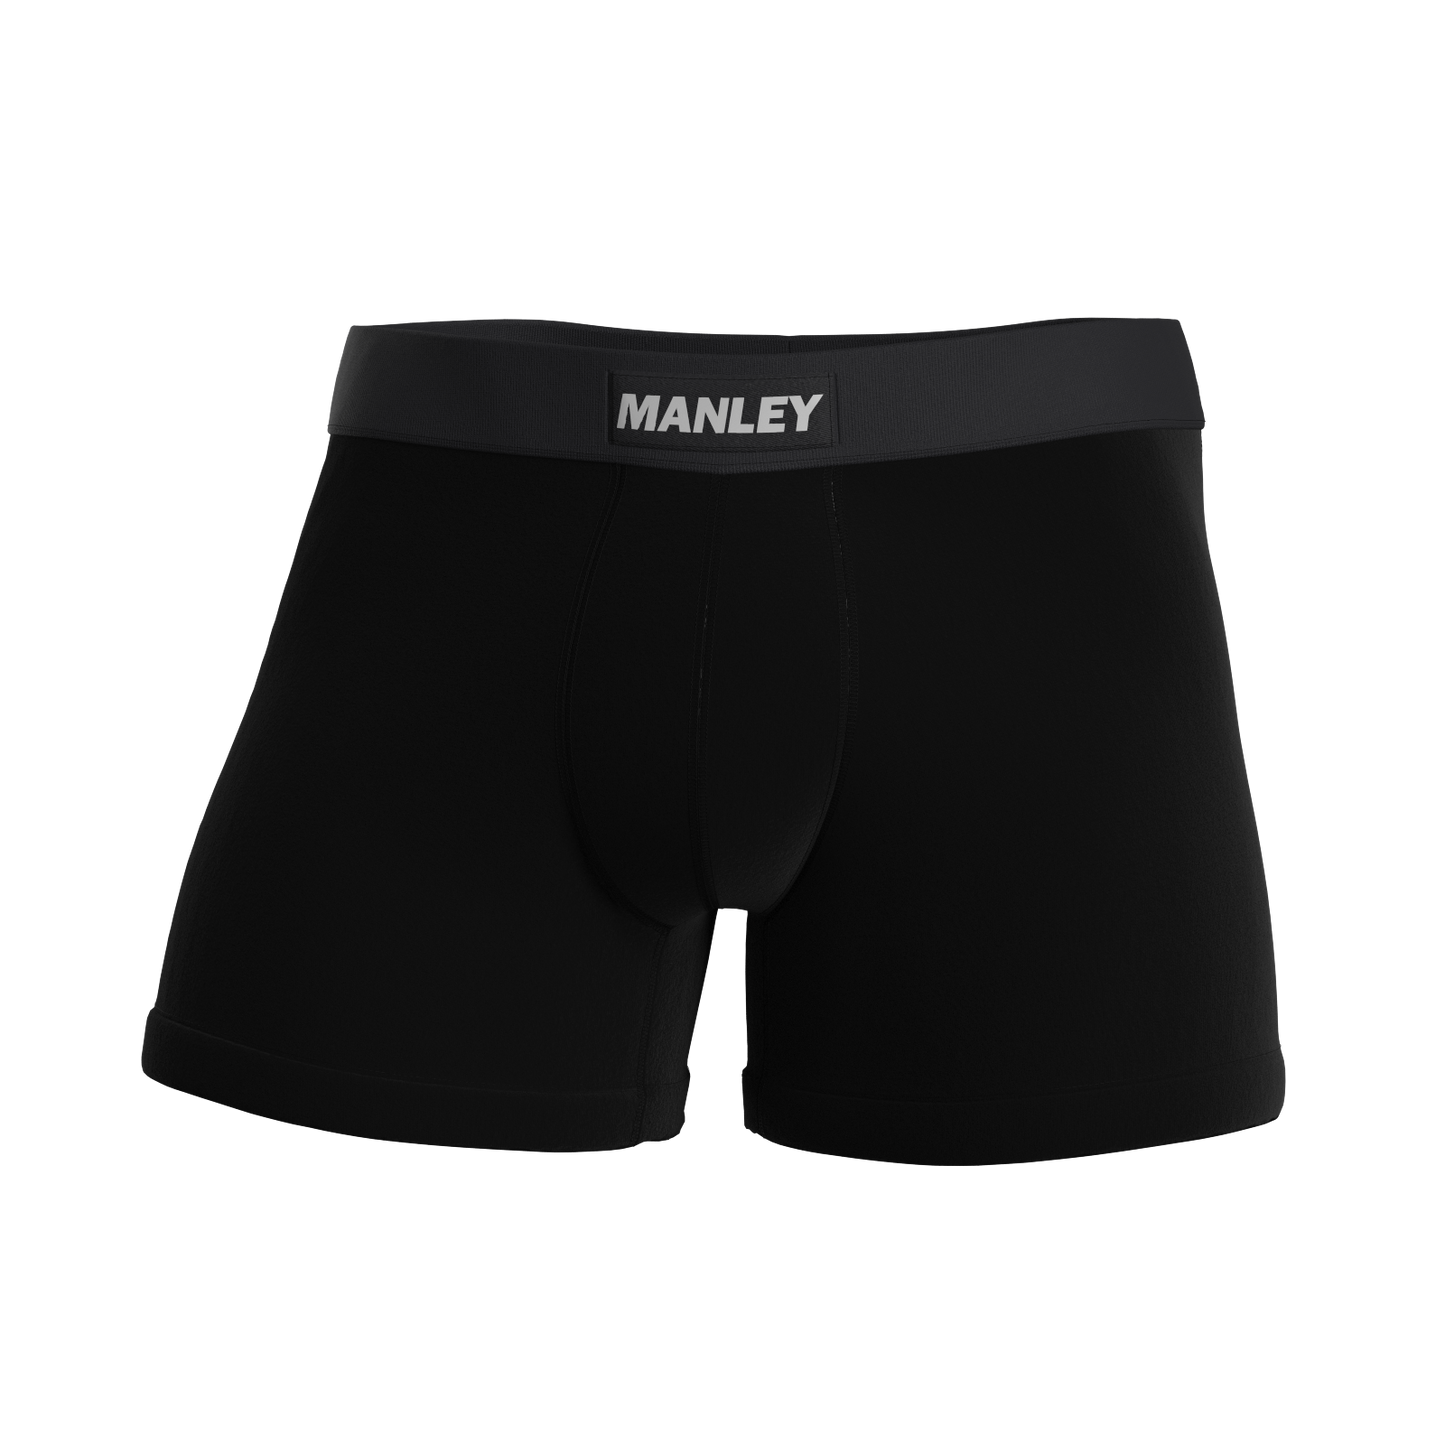 Black to basics boxer briefs with Manley Barrier Technology that stops the pee spot. Feel manly in Manley with our Presenting Pouch.